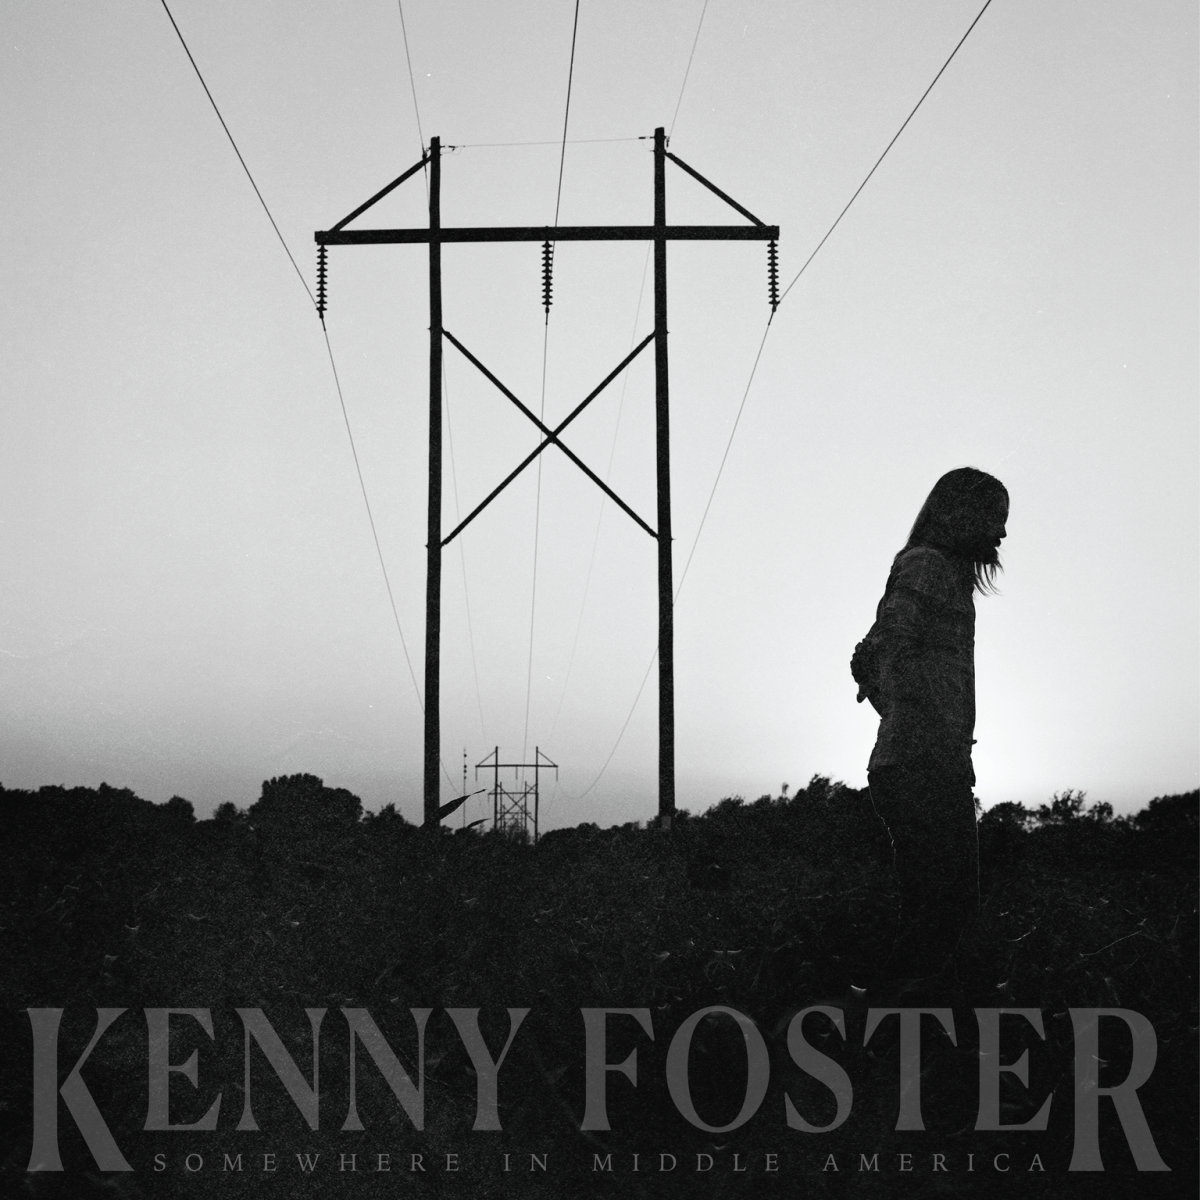 Kenny Foster Shares Long-Awaited Second Album 'Somewhere In Middle America'